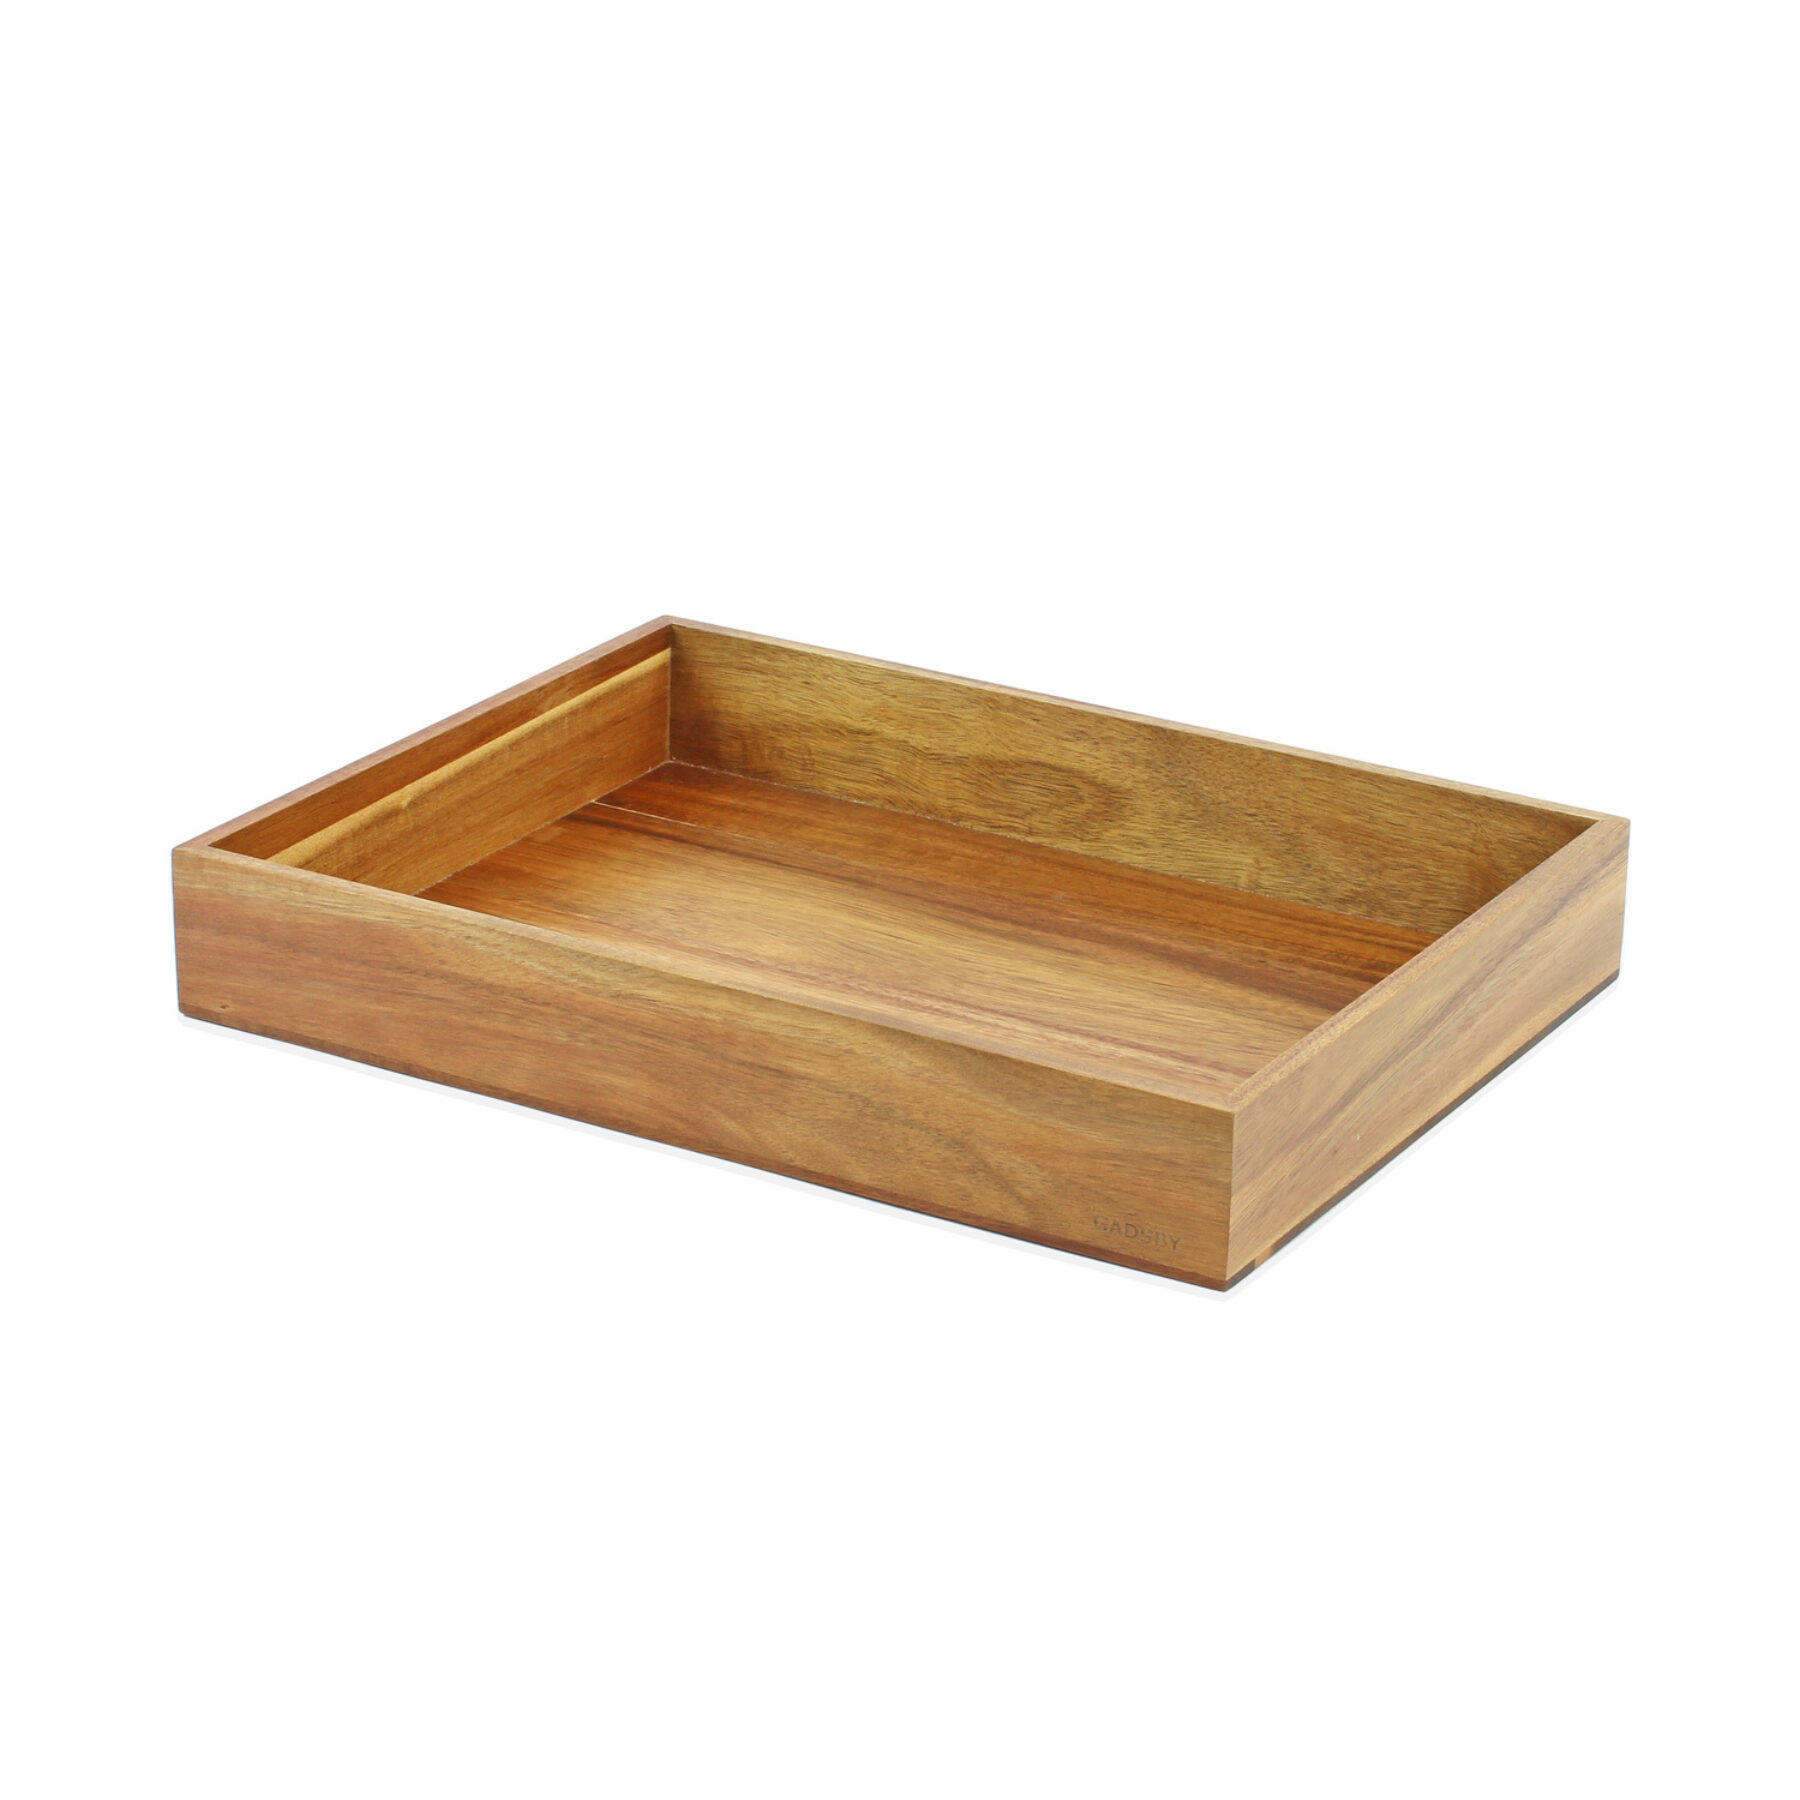 Acacia Shallow Wooden Crate 40 x 30cm